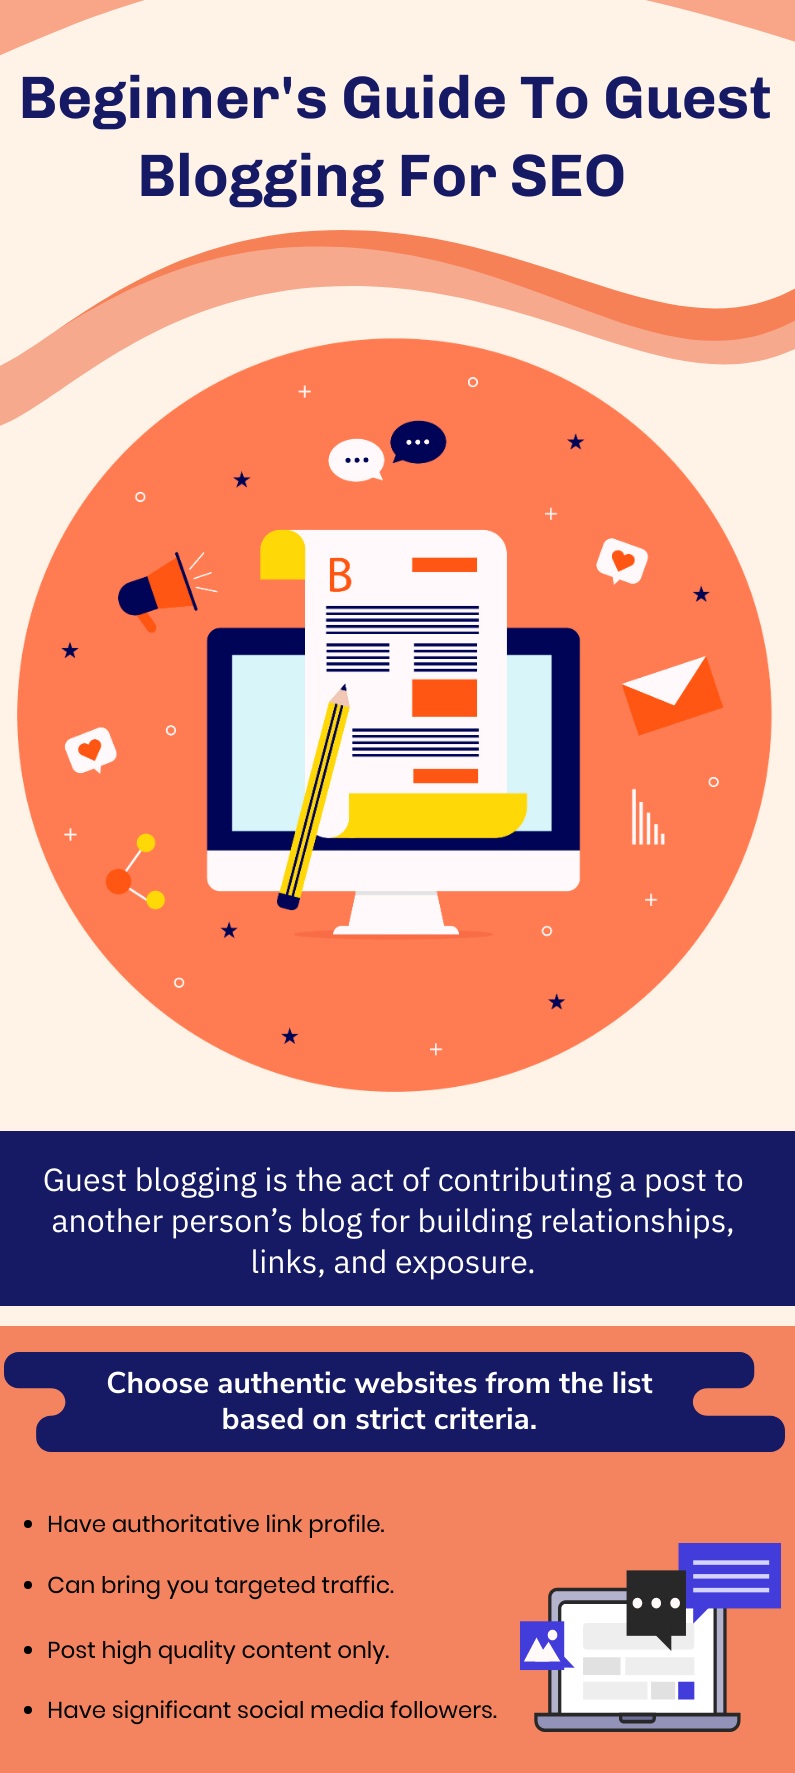 Beginners-Guide-To-Guest-Blogging-For-SEO